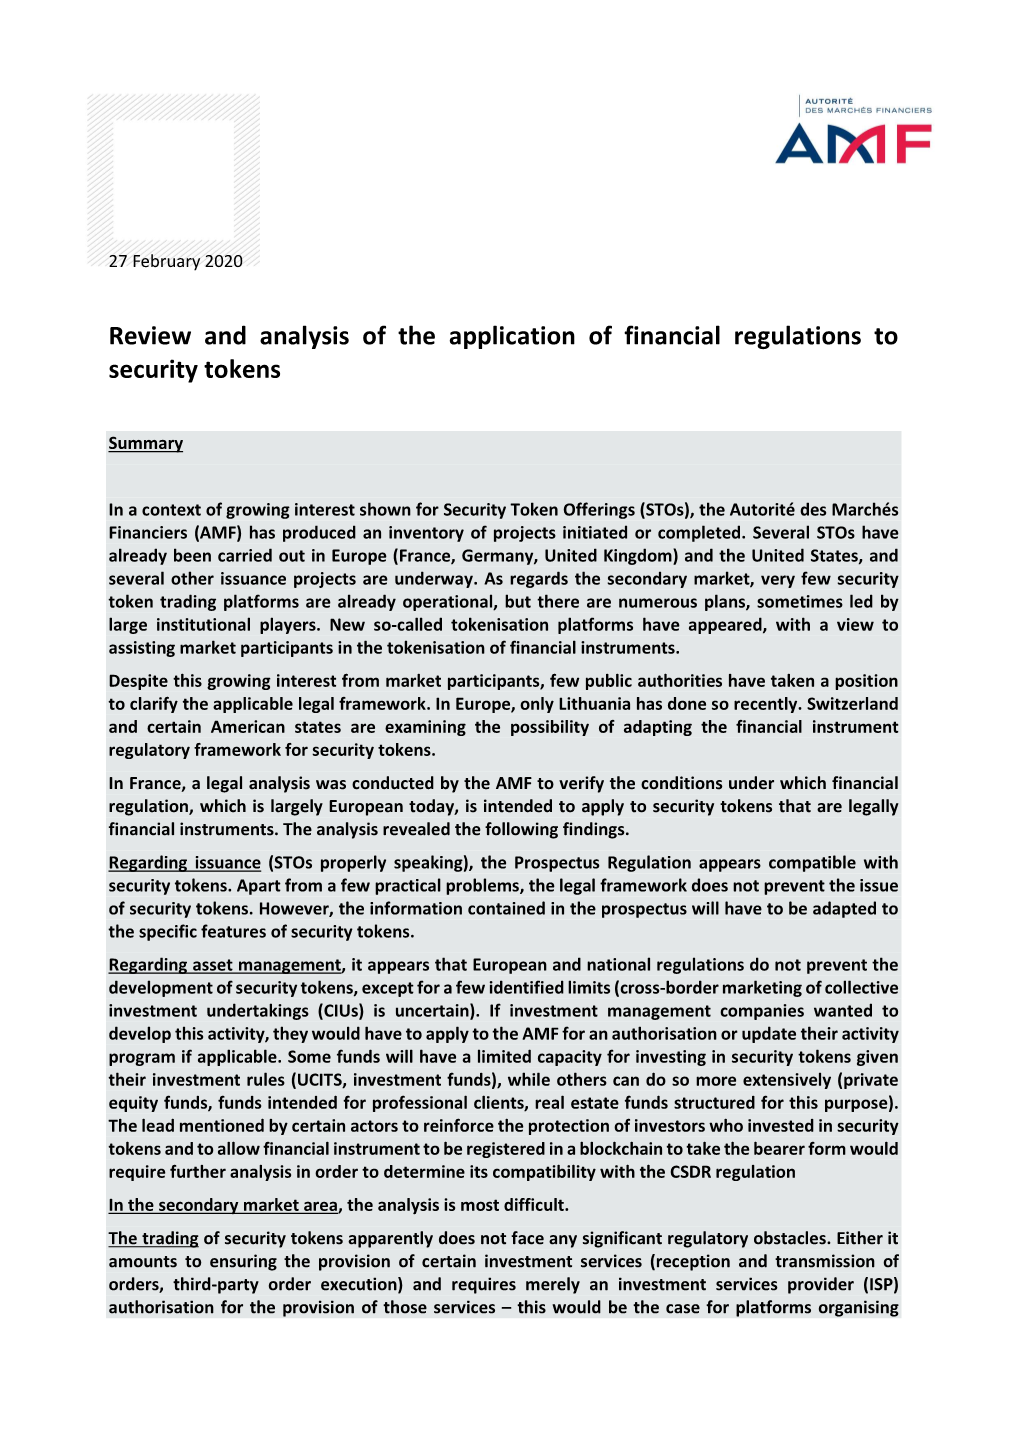 Review and Analysis of the Application of Financial Regulations to Security Tokens